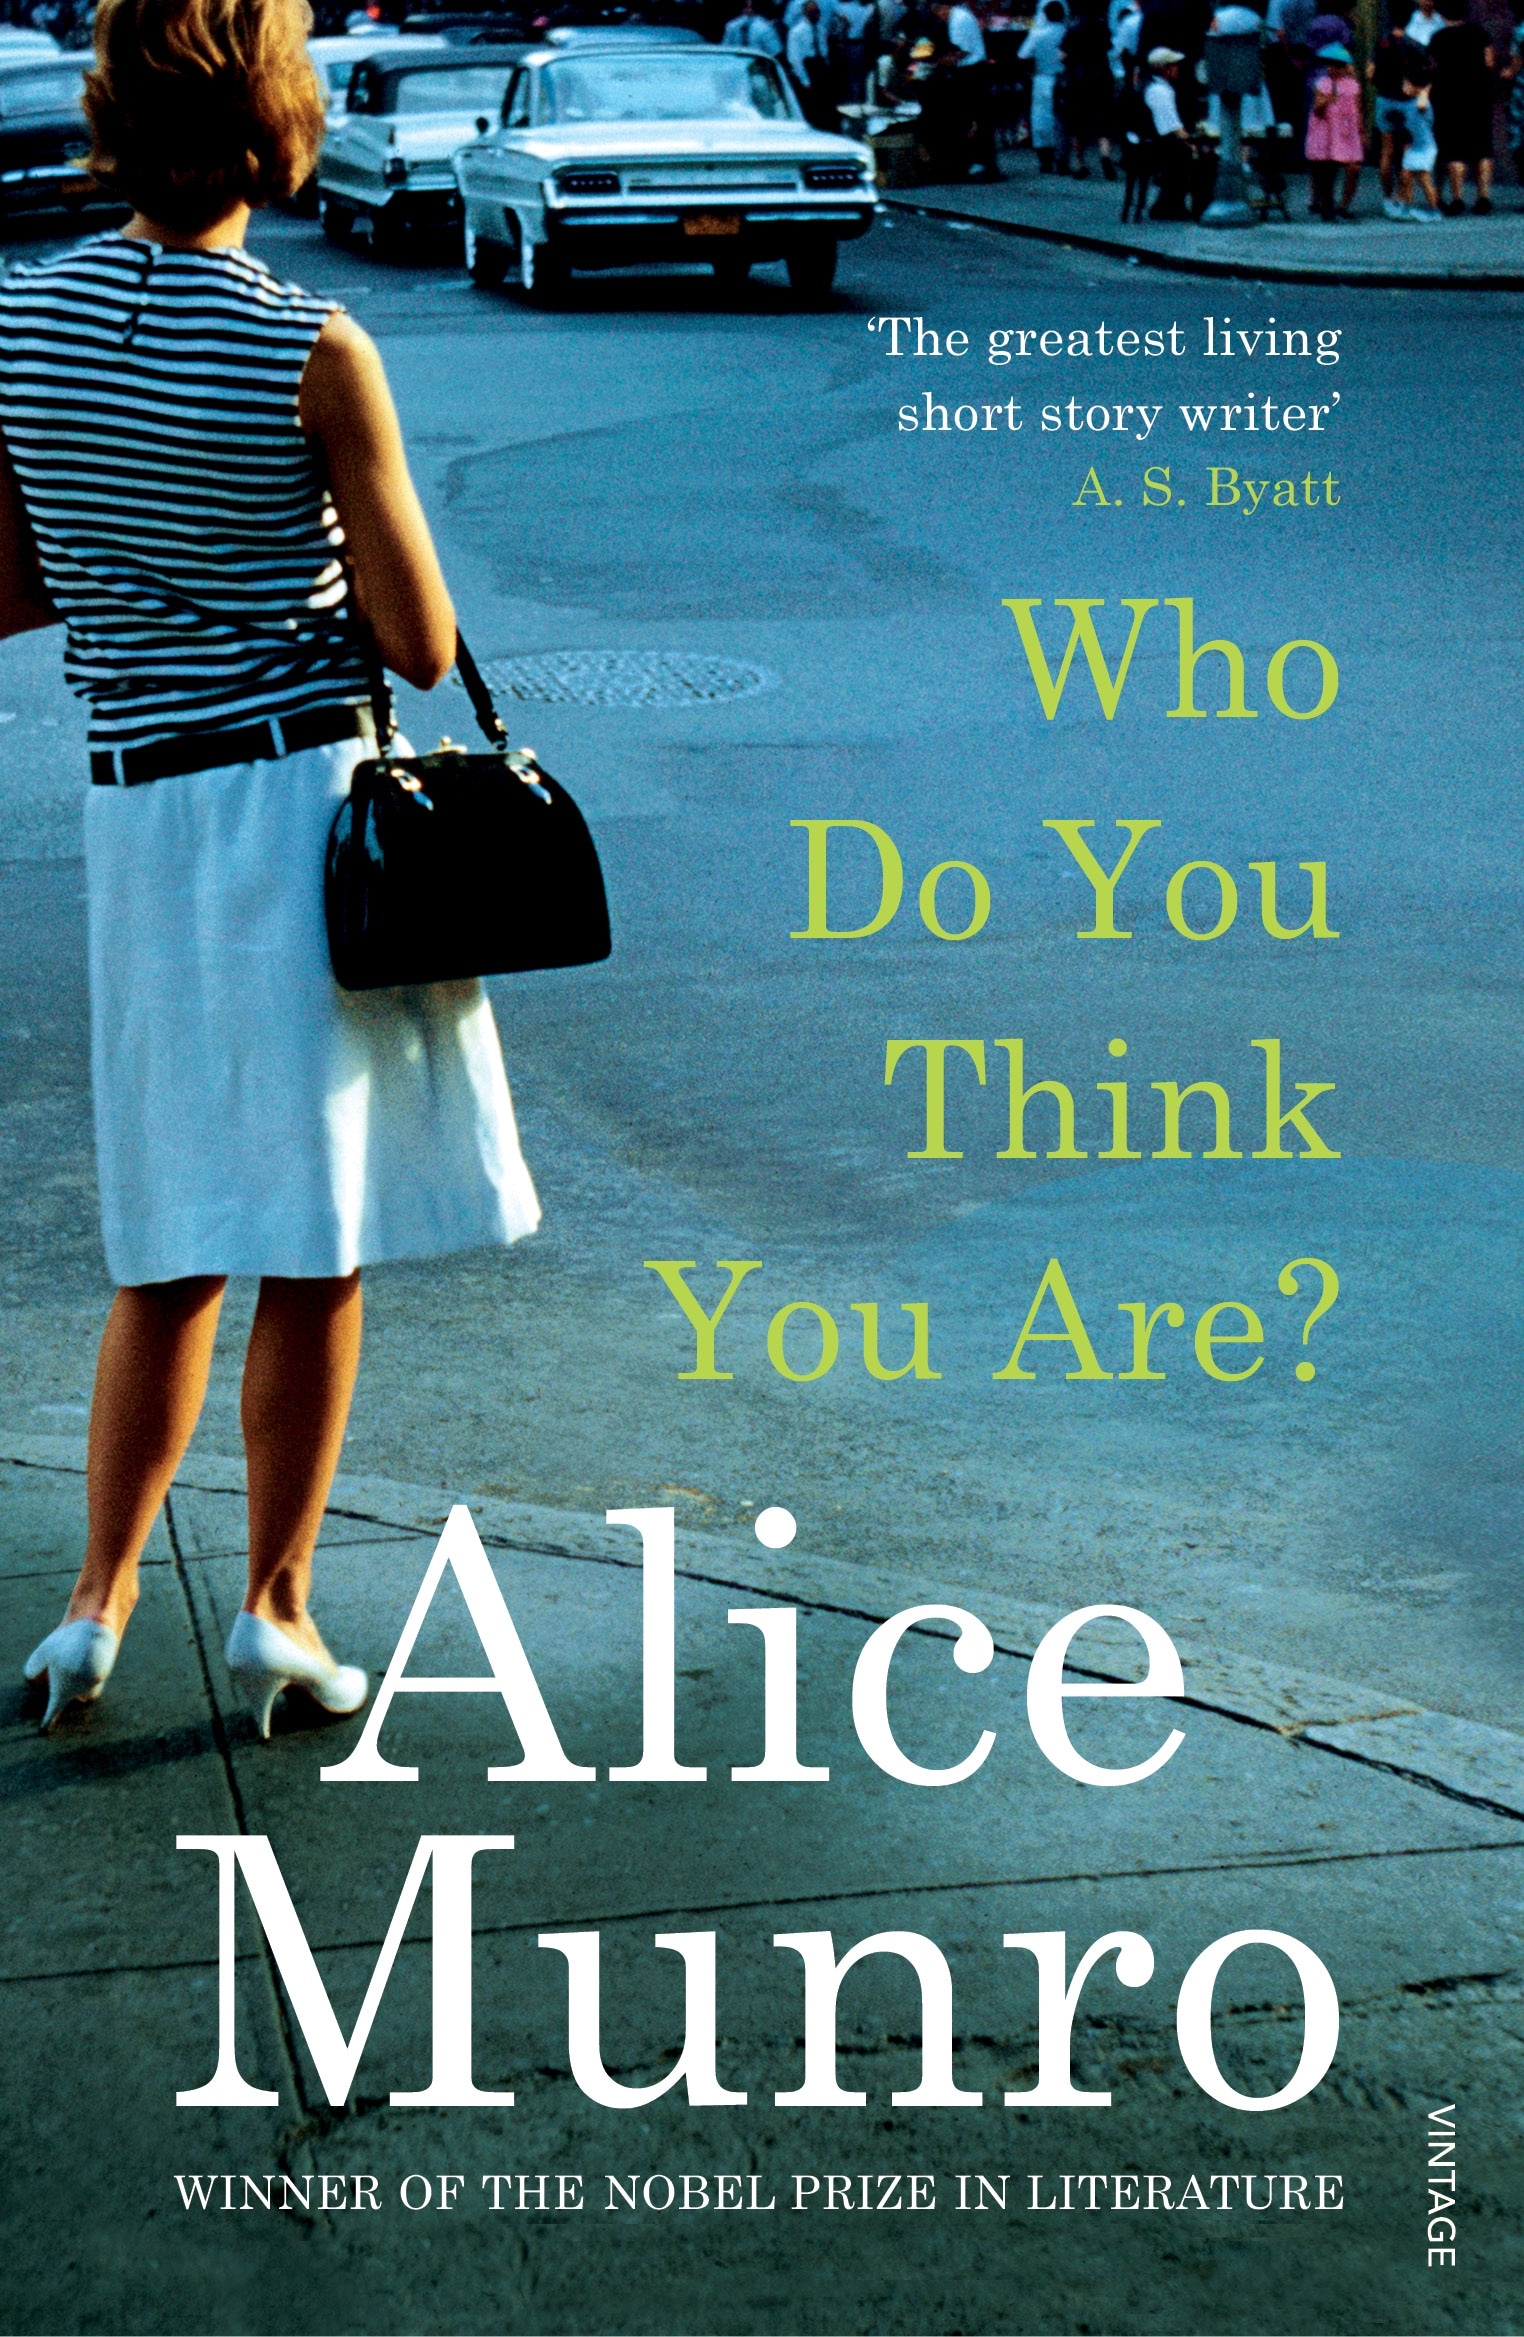 Book “Who Do You Think You Are?” by Alice Munro — July 1, 2021